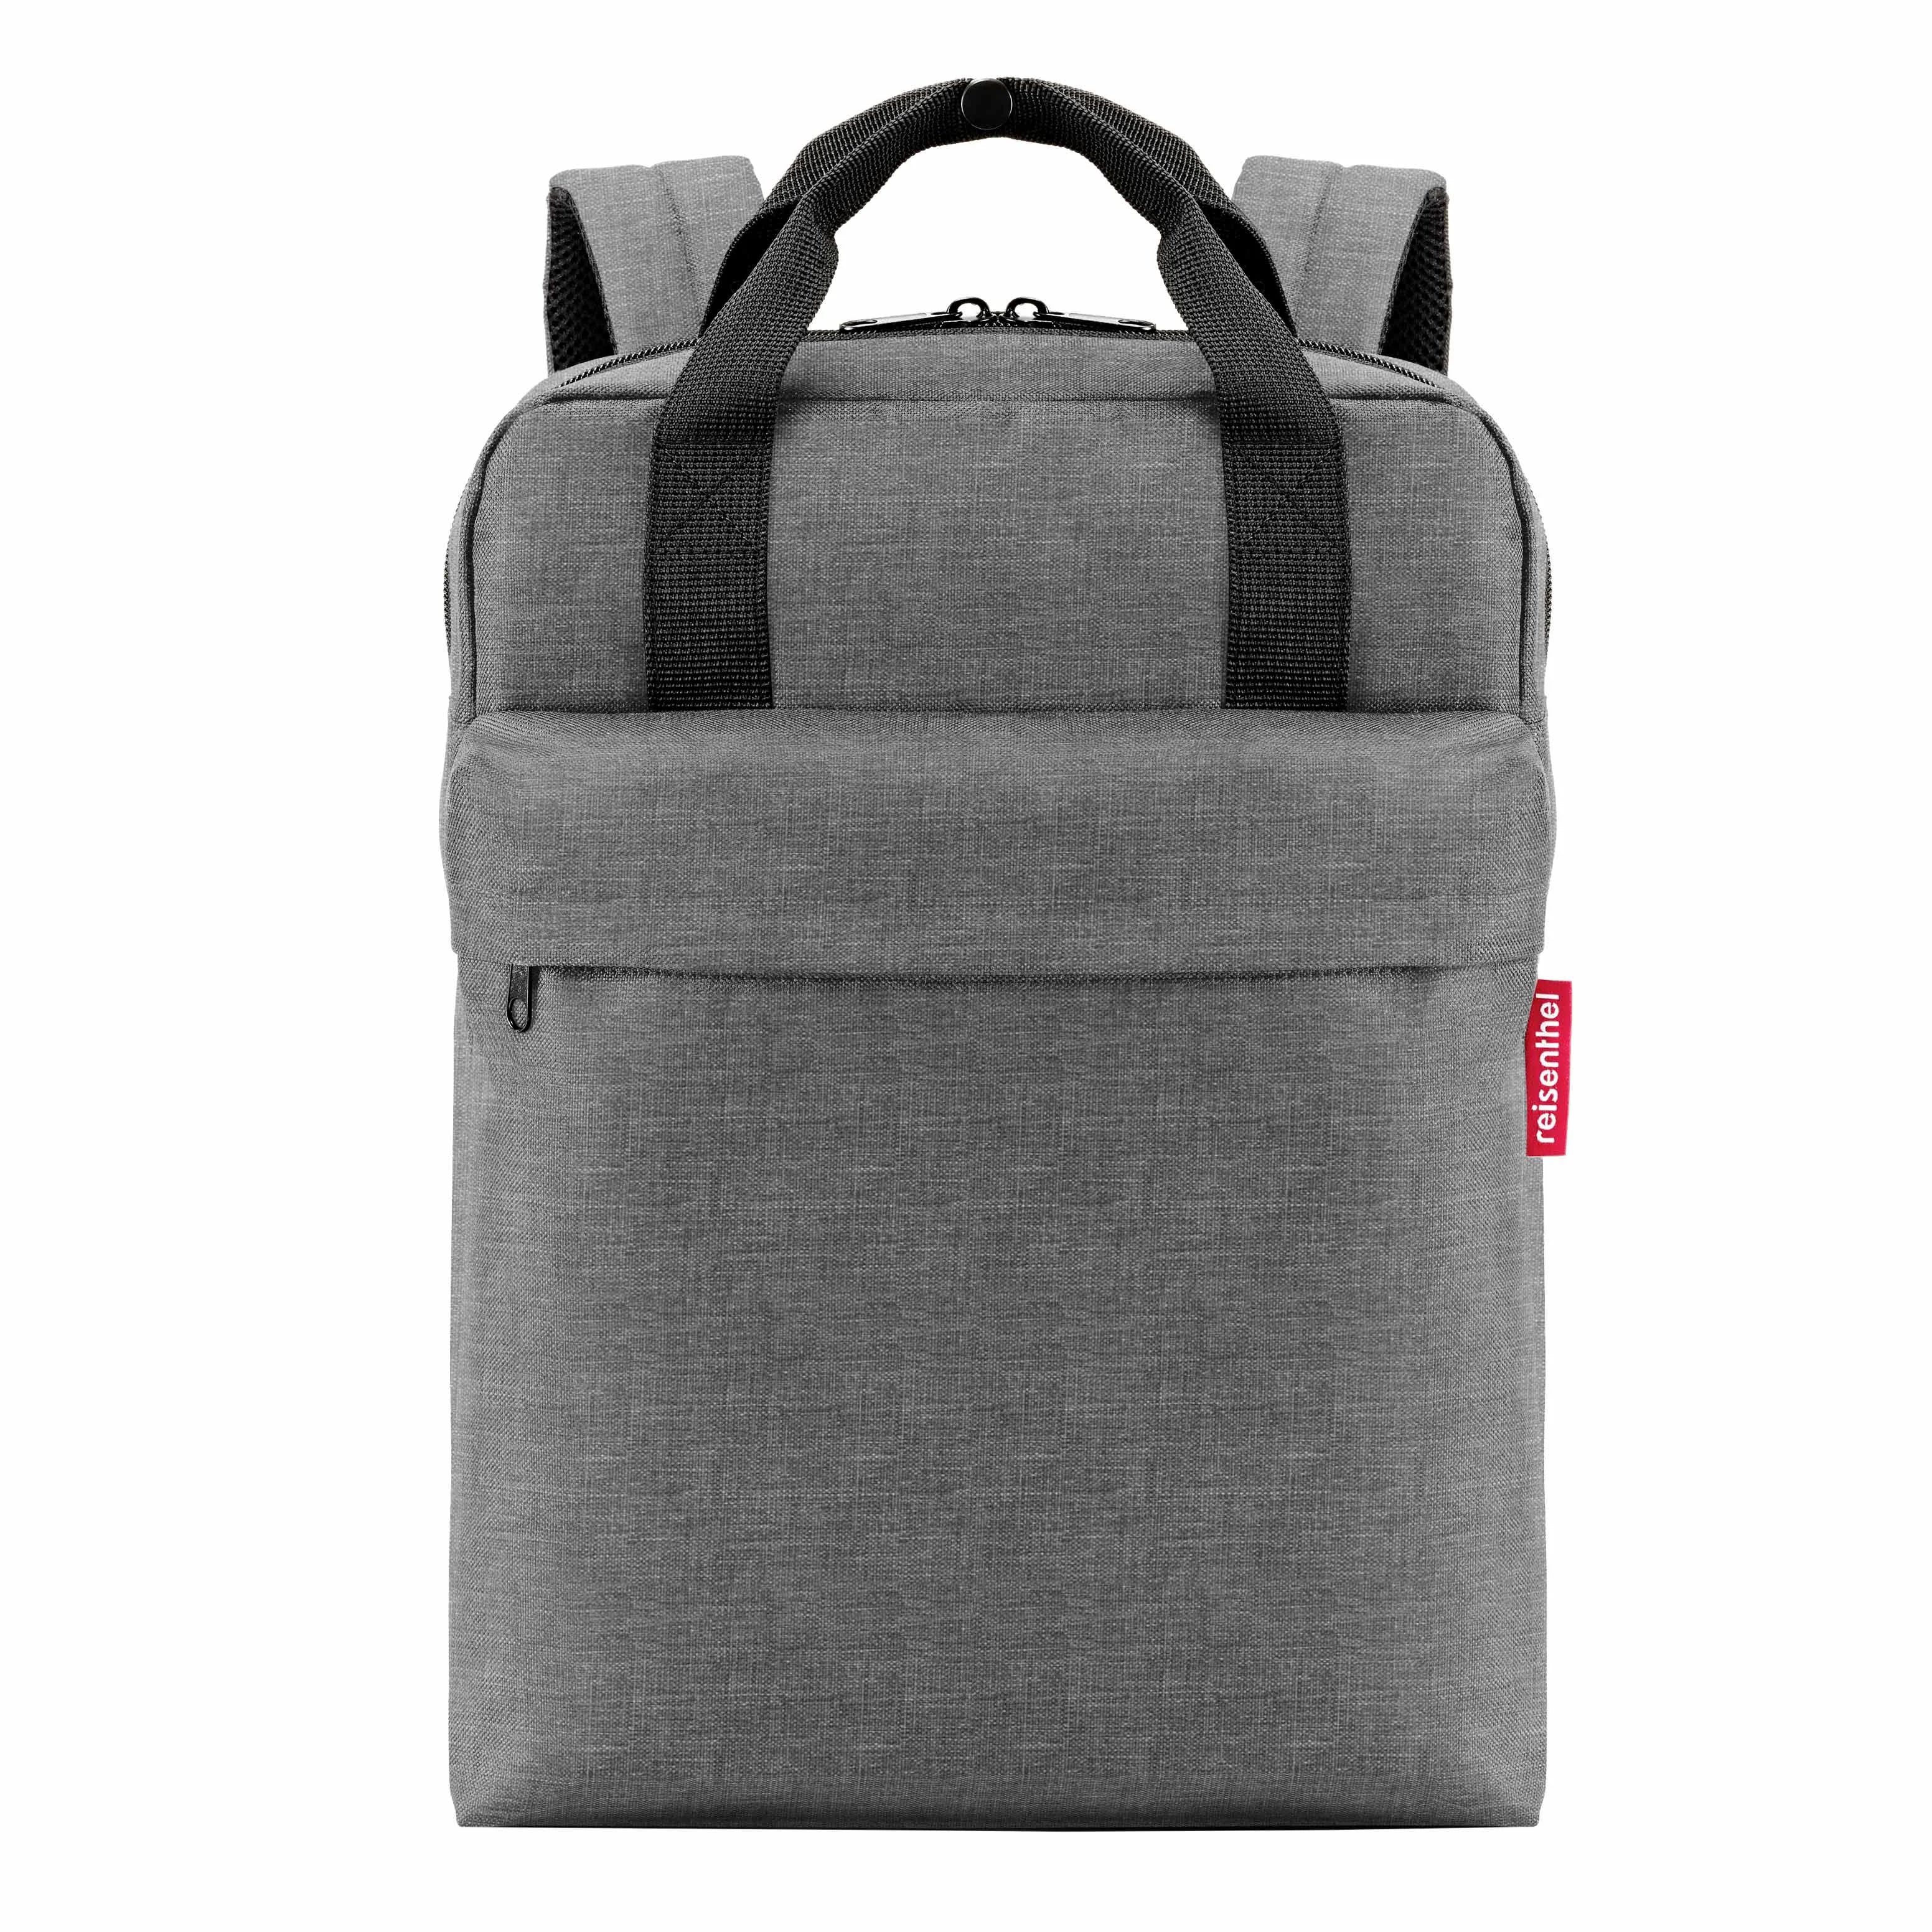 Reisenthel Travelling Allday Backpack M 39 cm - Twist Silver